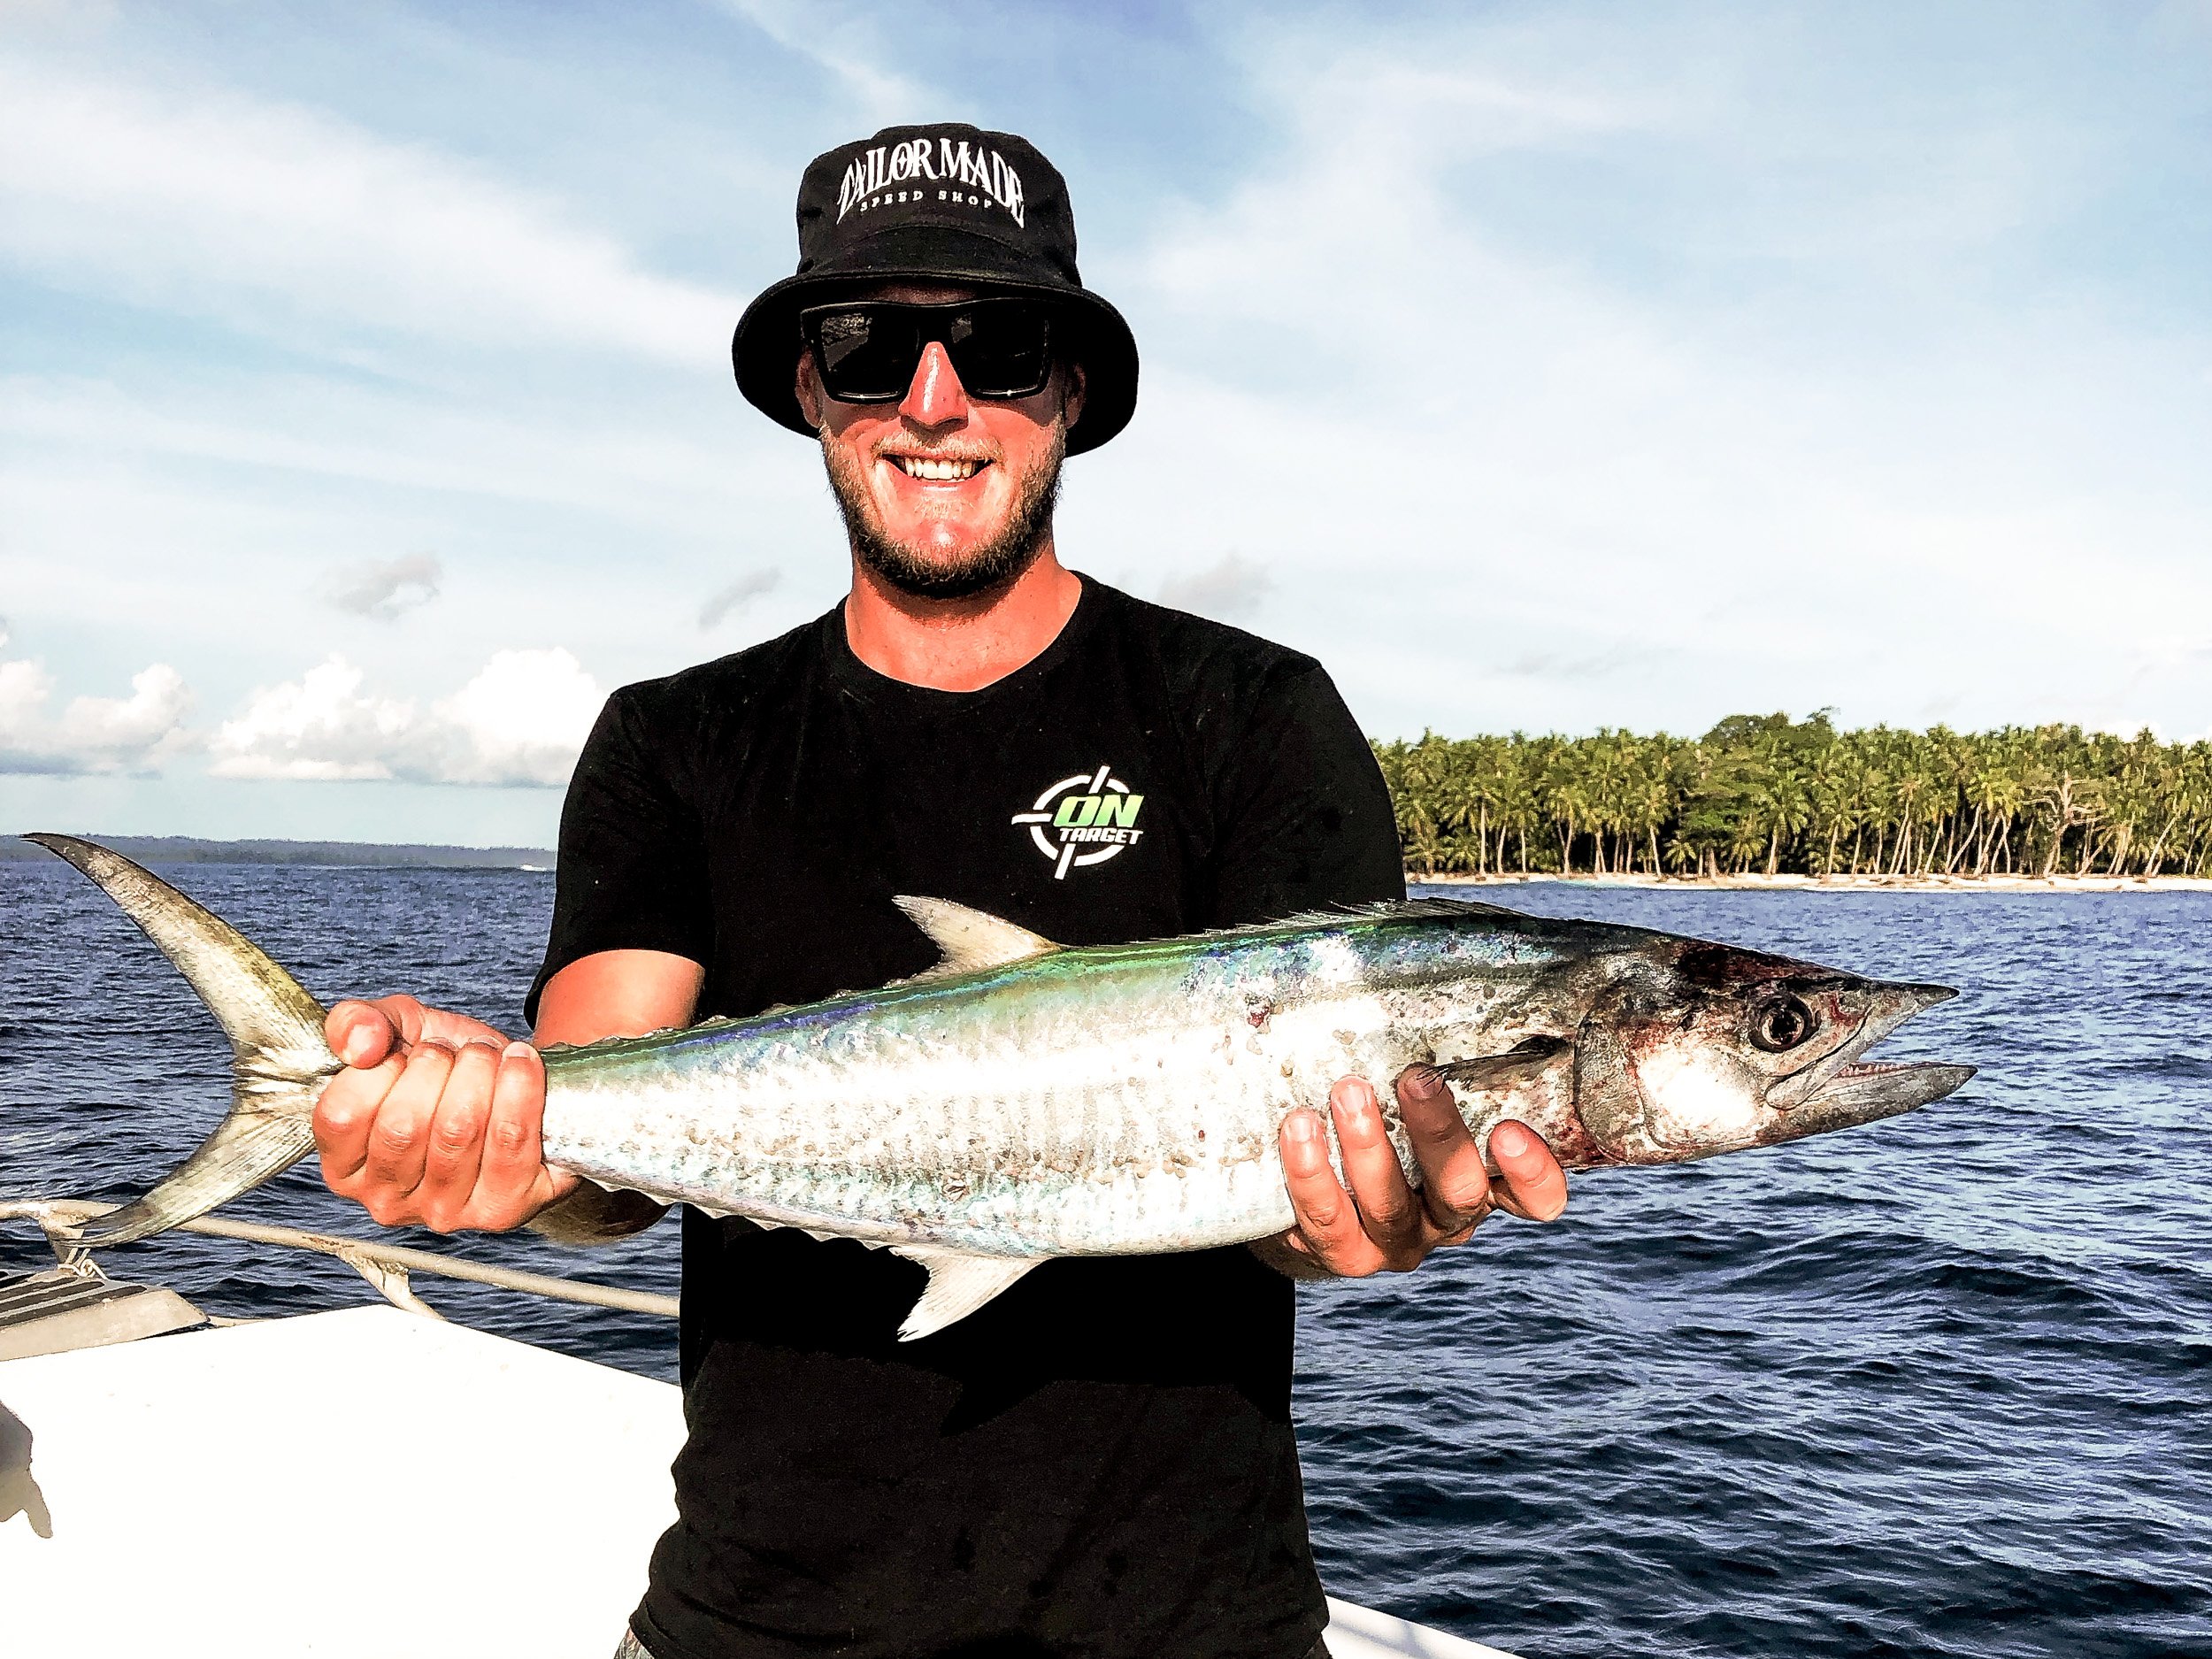 ….. Kyle with second best catch of the trip